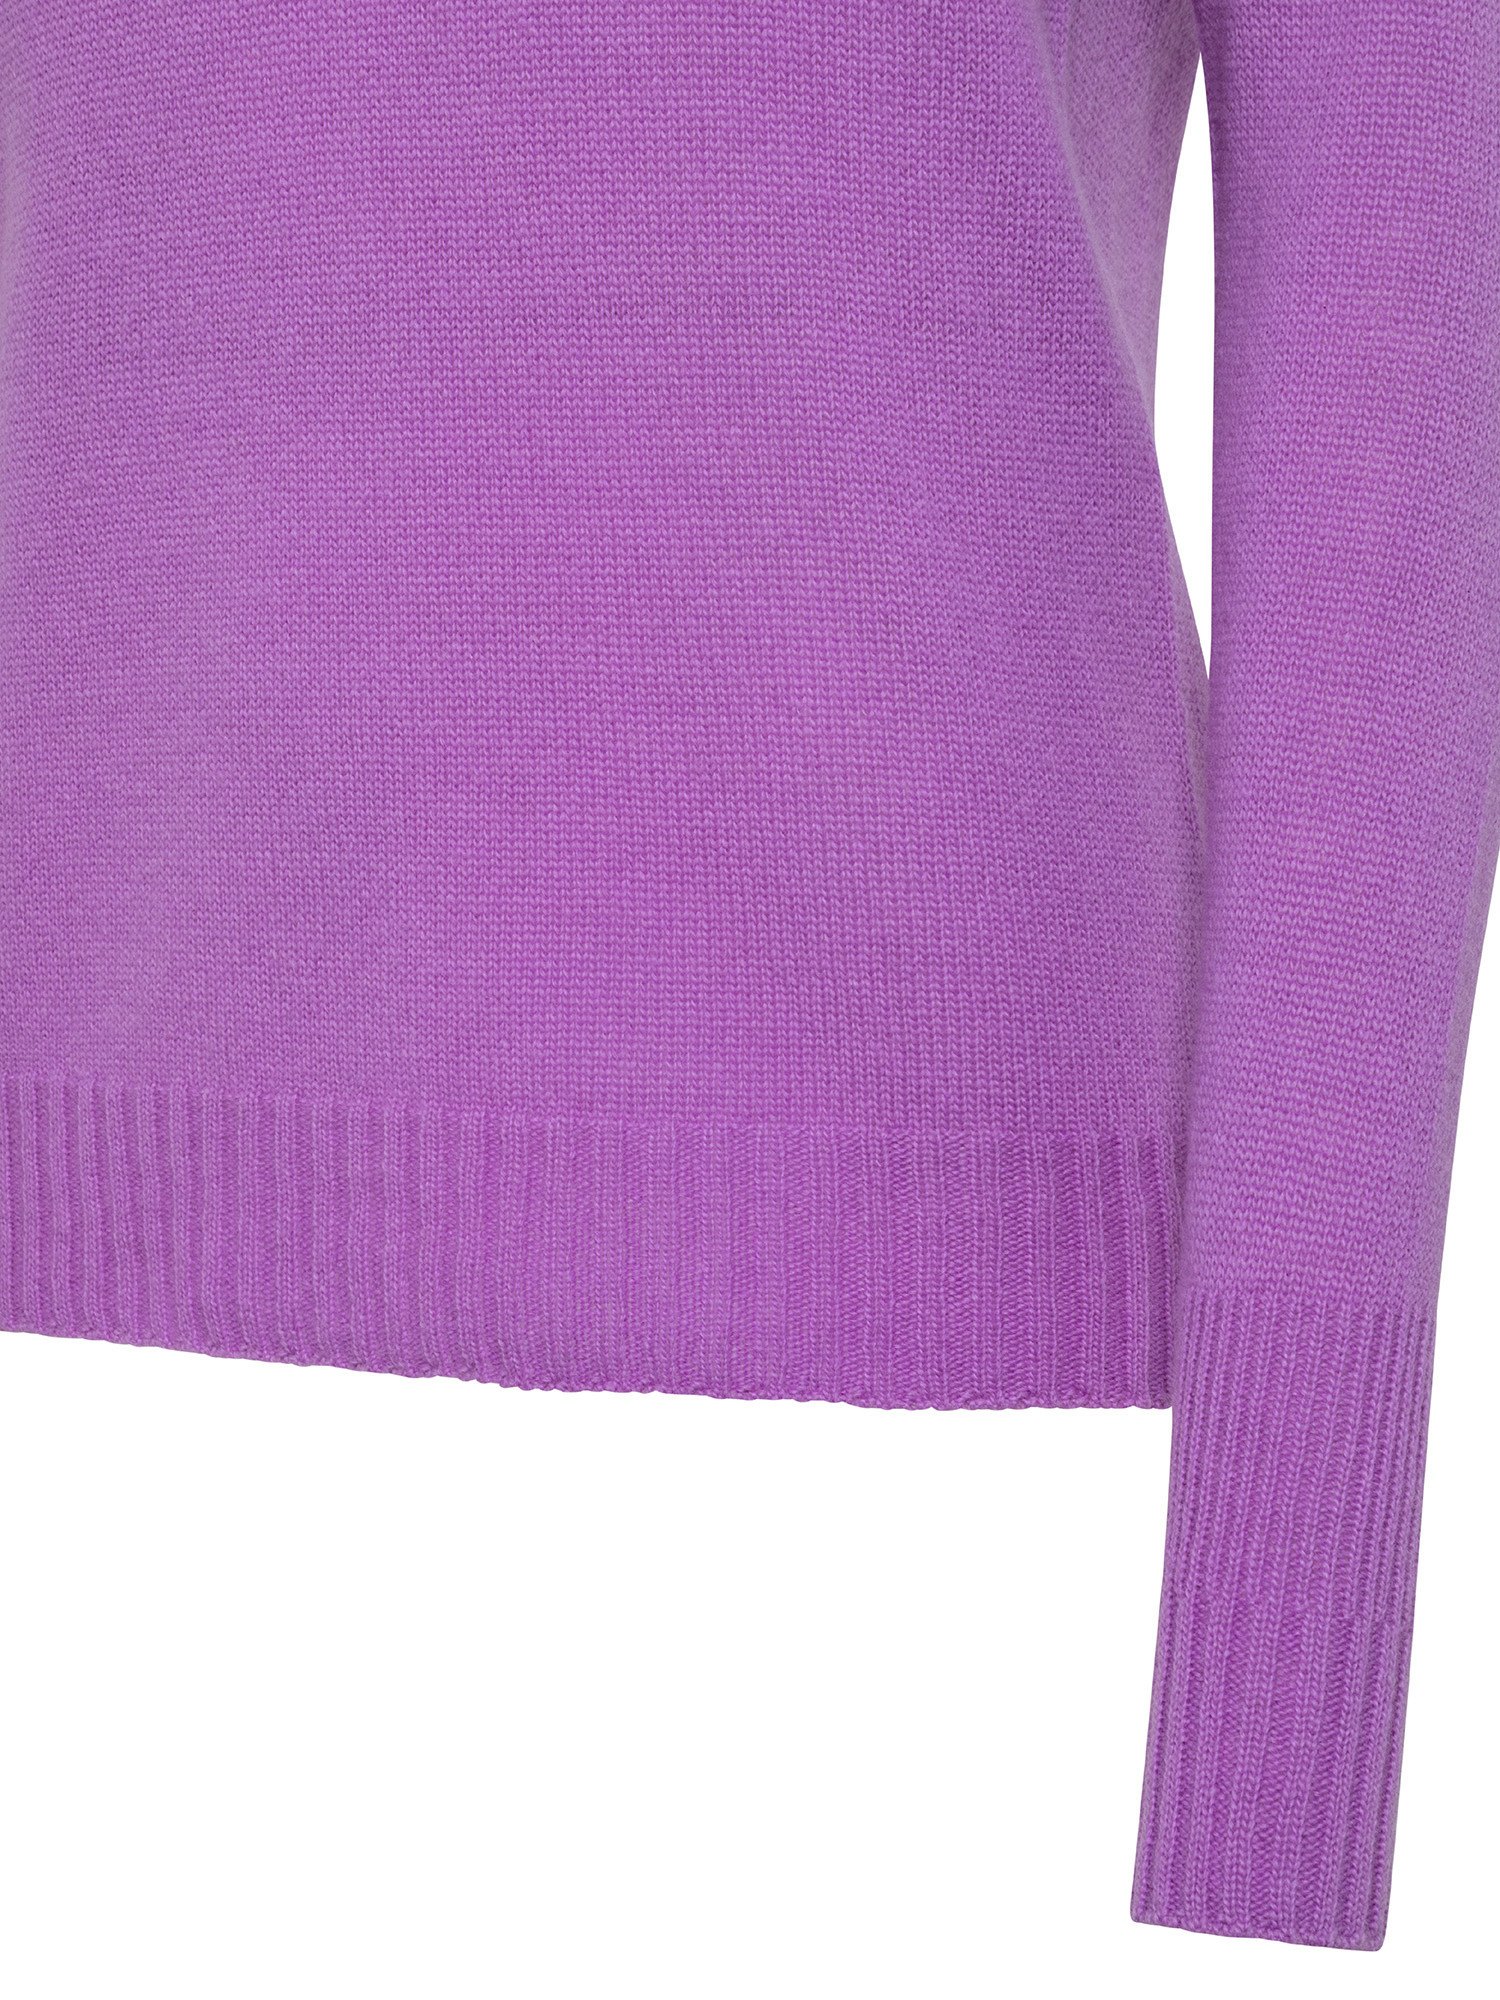 K Collection - Crater neck sweater, Purple Lilac, large image number 2